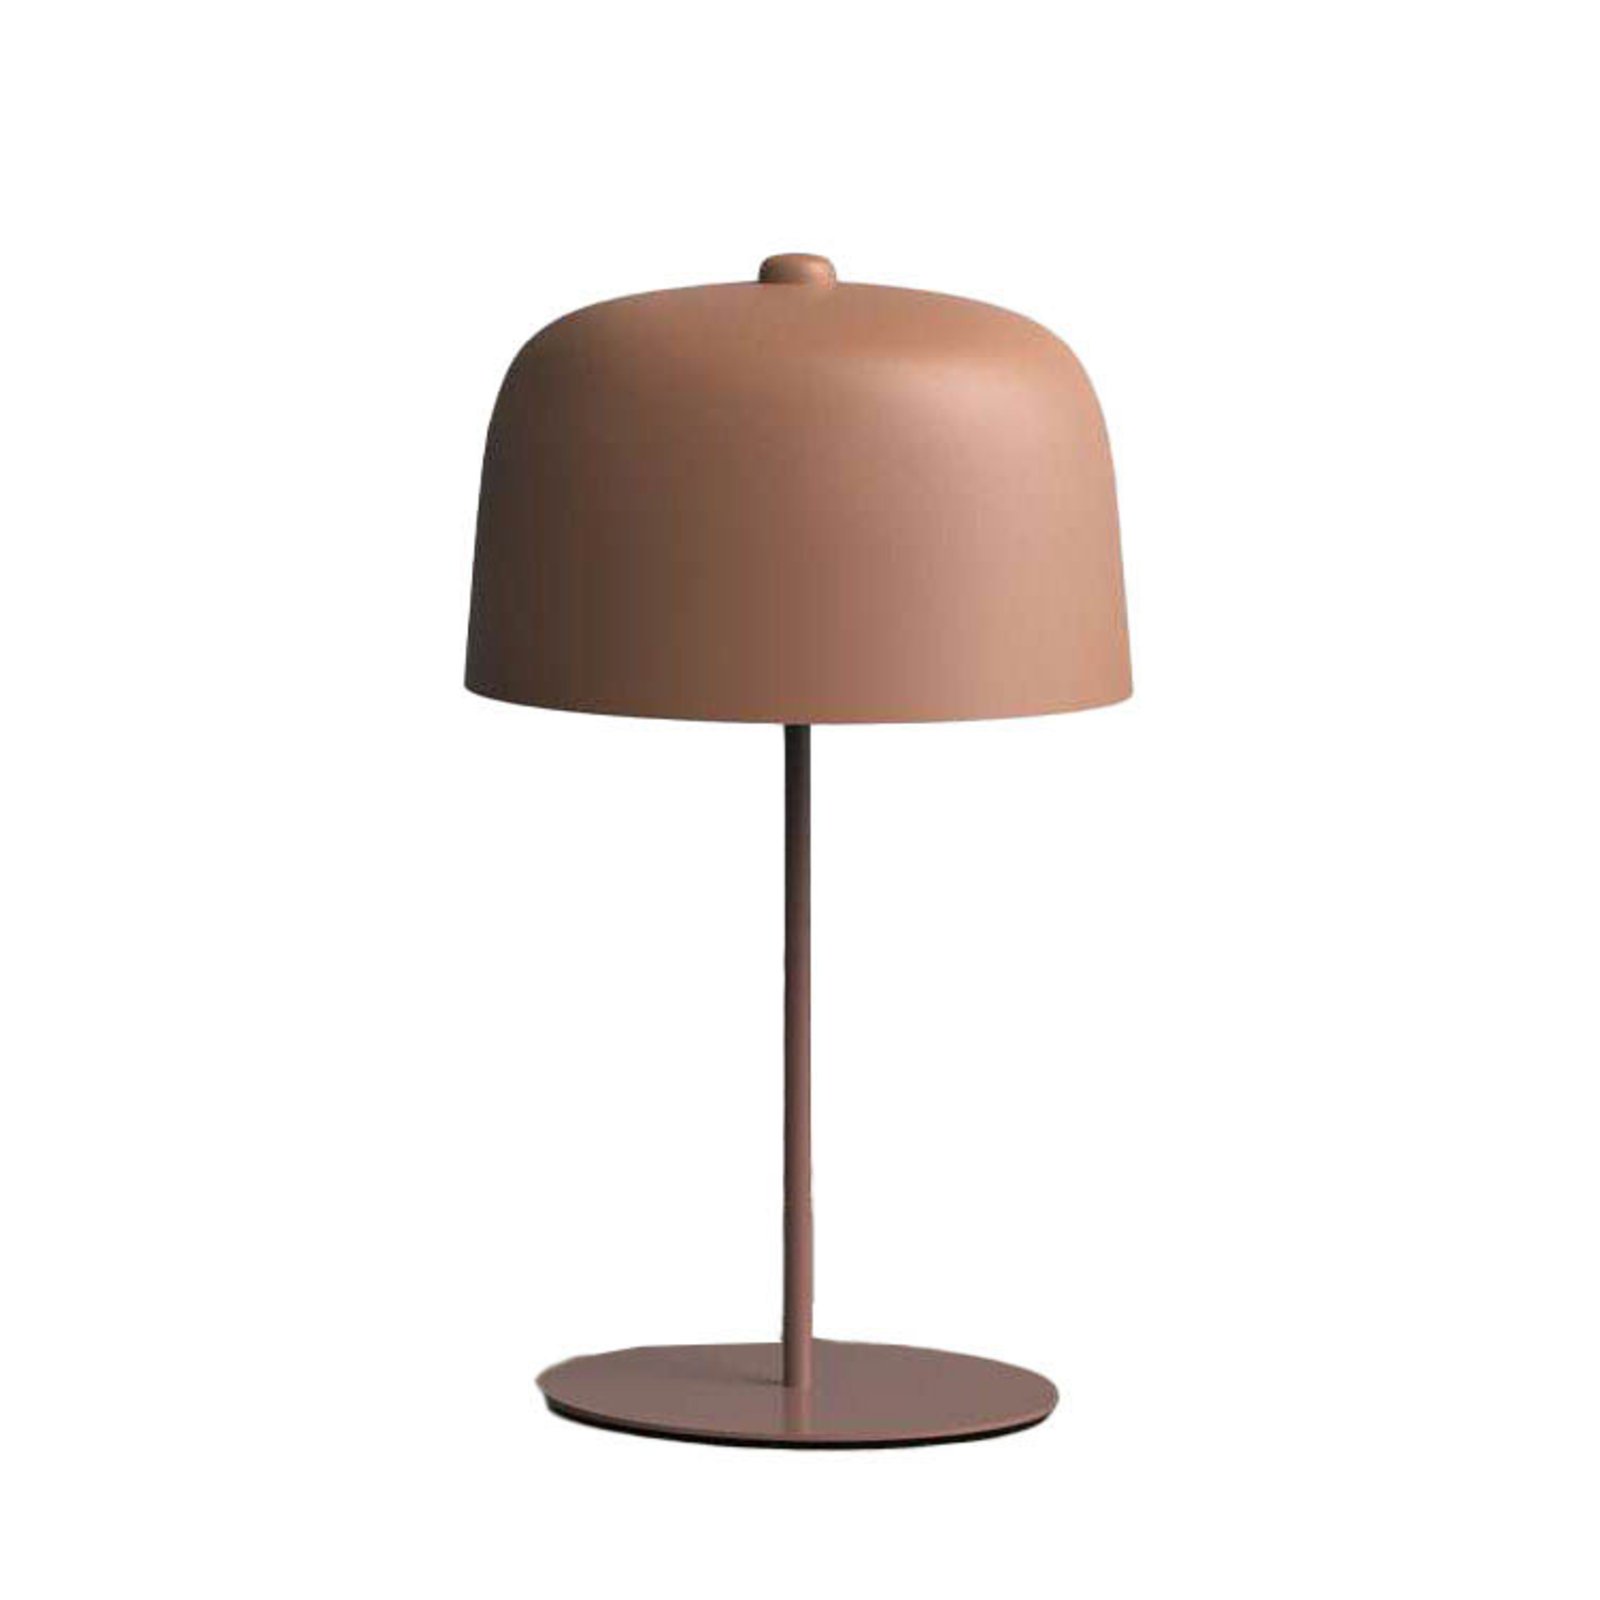 Luceplan Zile table lamp brick red, height 66 cm